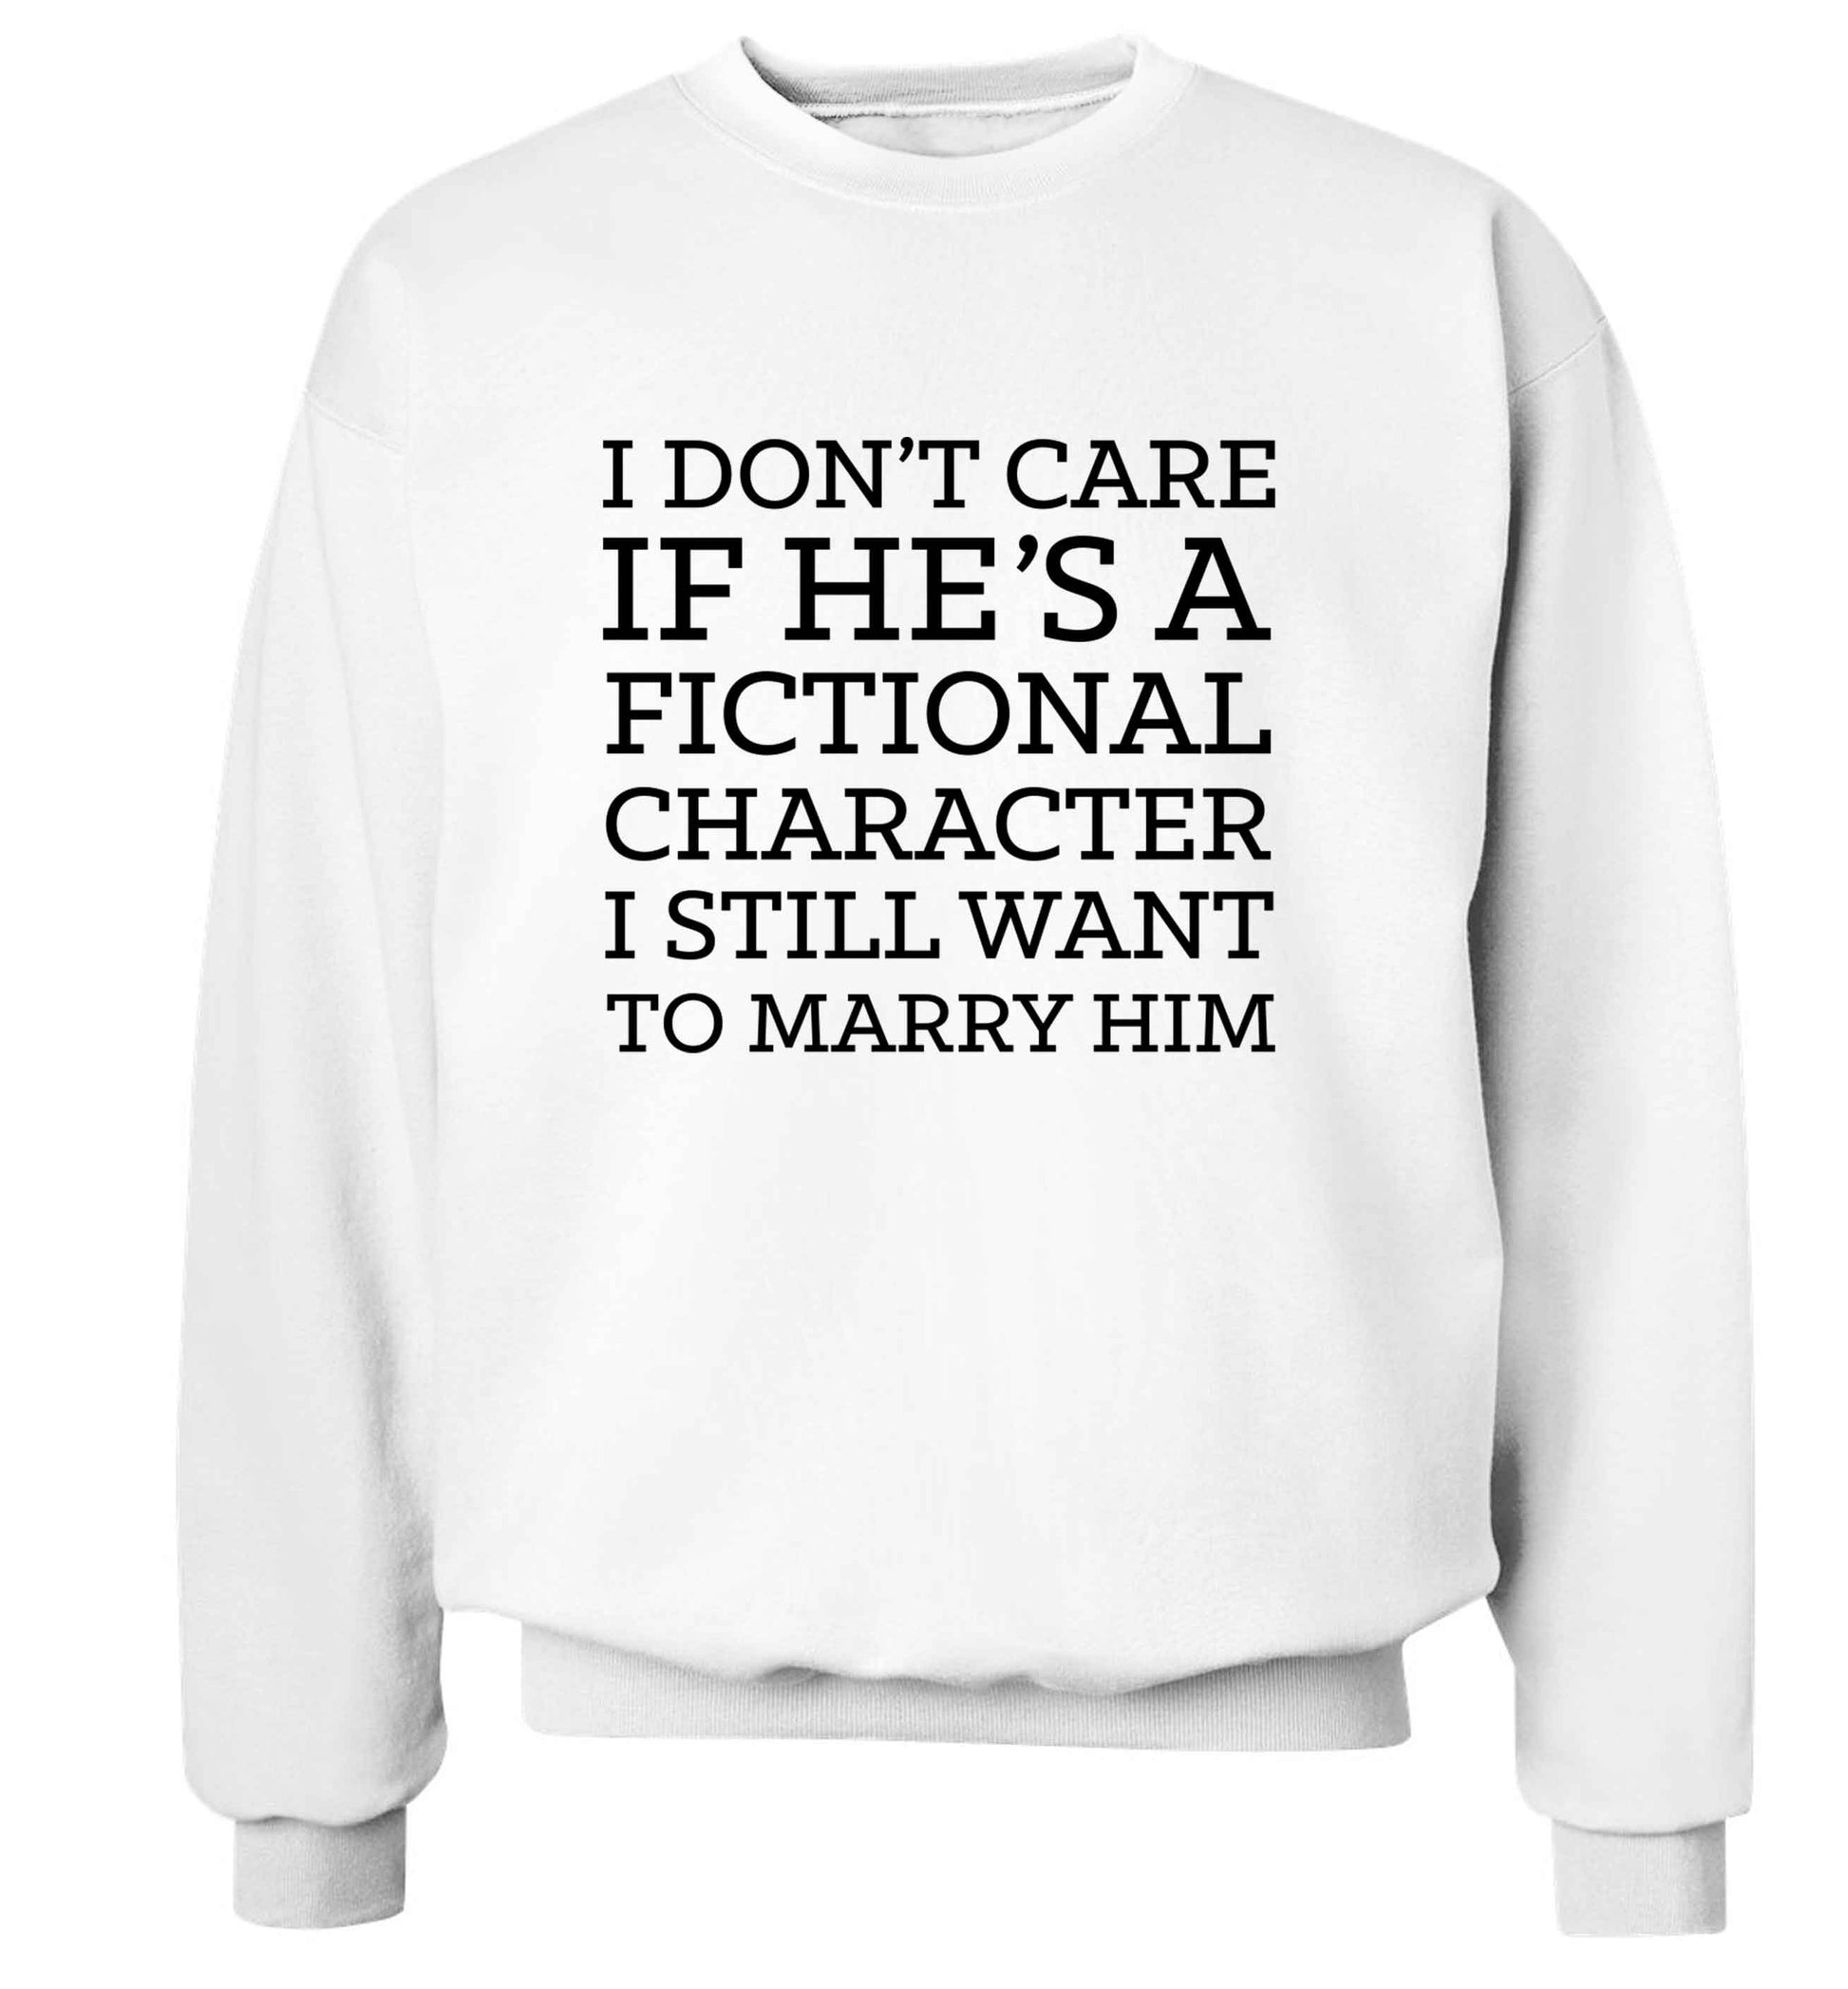 I don't care if he's a fictional character I still want to marry him adult's unisex white sweater 2XL